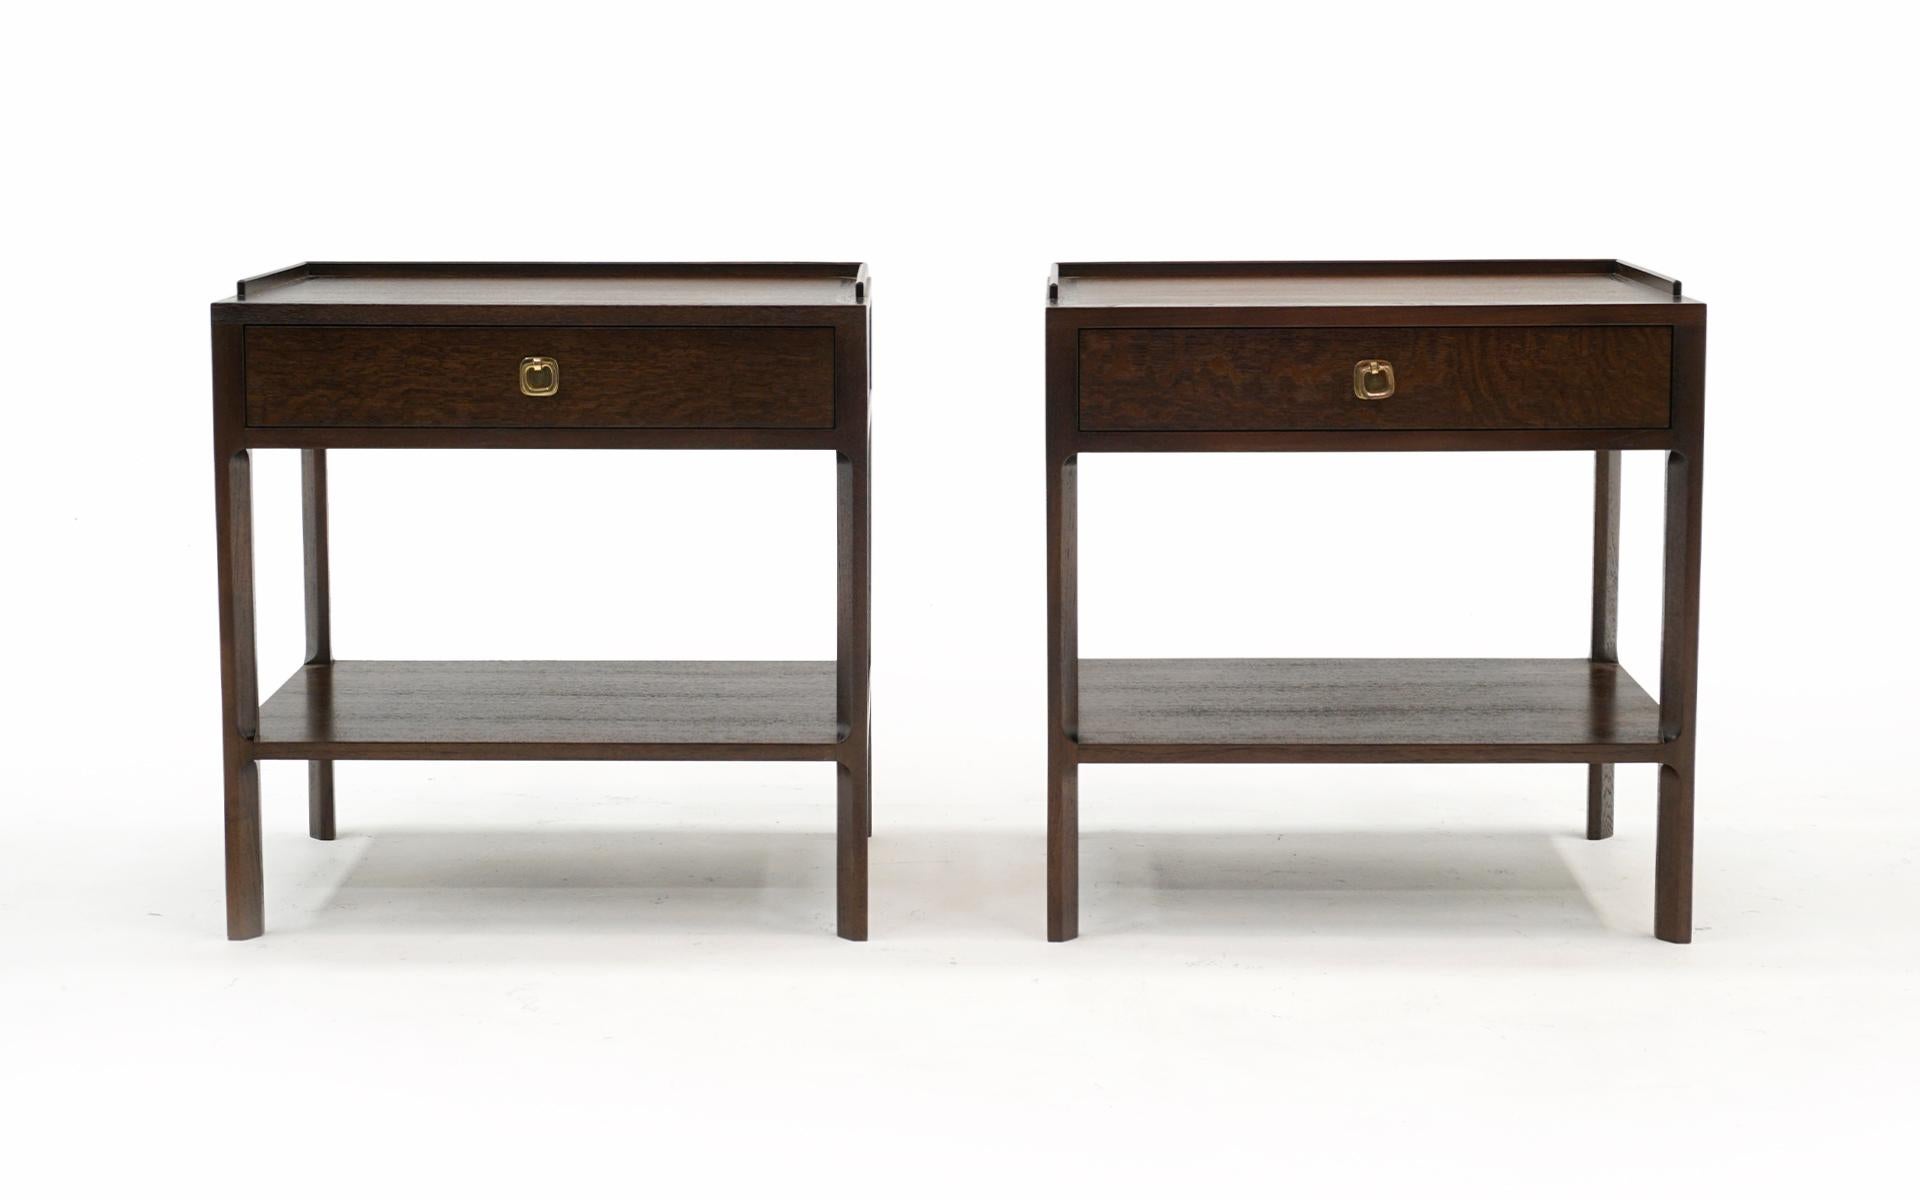 Pair of night stands / end or side tables designed by Edward Wormley and manufactured by Dunbar, 1950s.  Solid Teak sculptural frames with English Brown Oak tops and sides with the original brass pulls.  These materials are cost prohibitive today. 